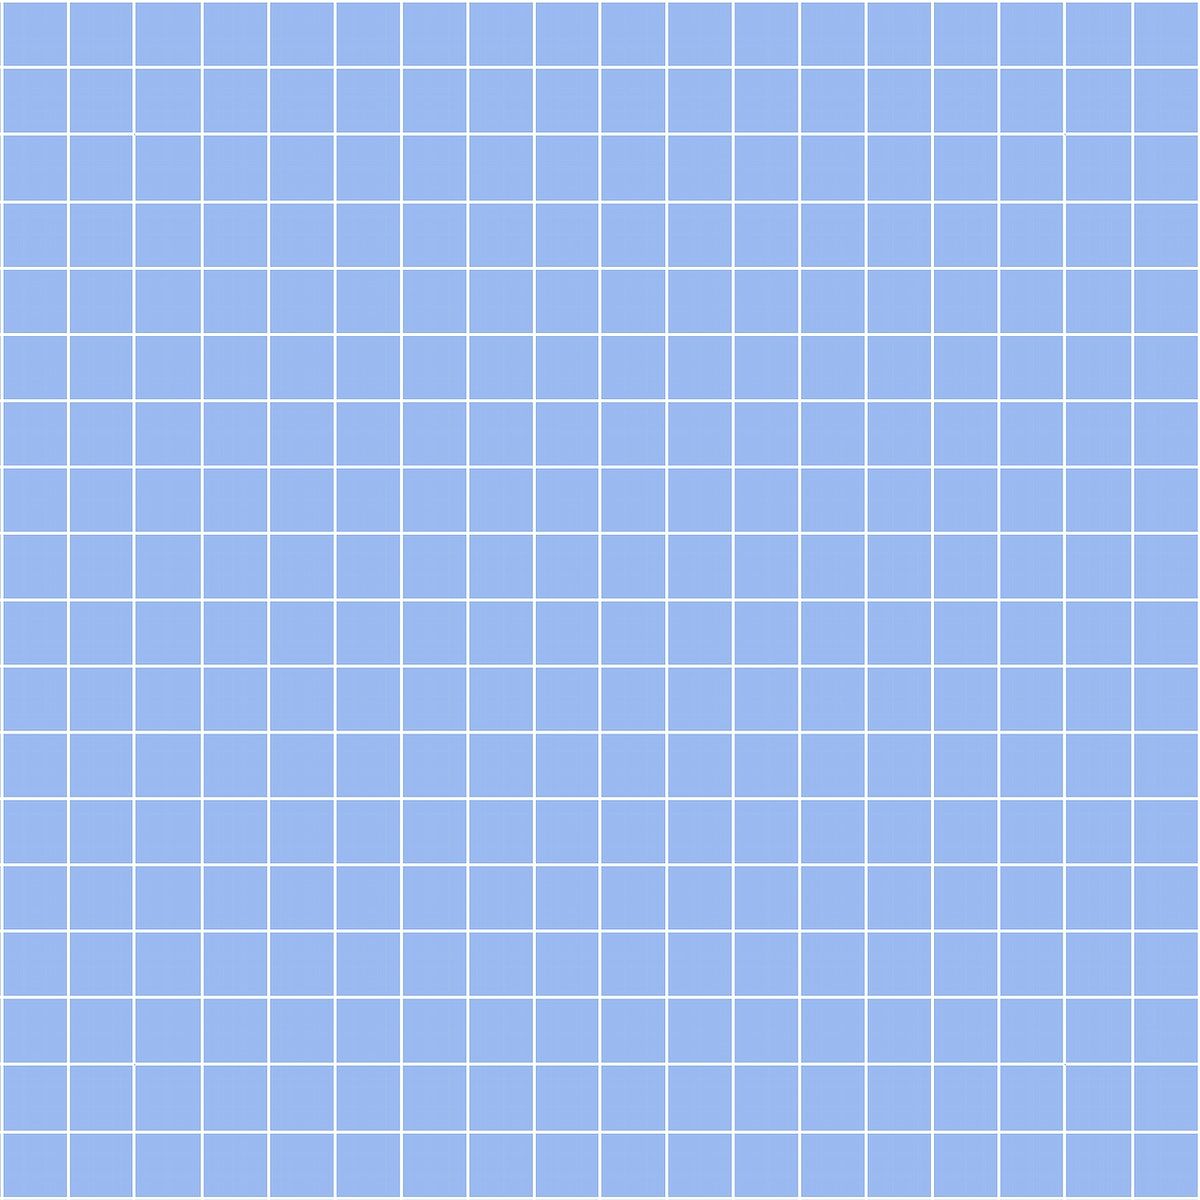 A blue grid pattern on the wall - Grid